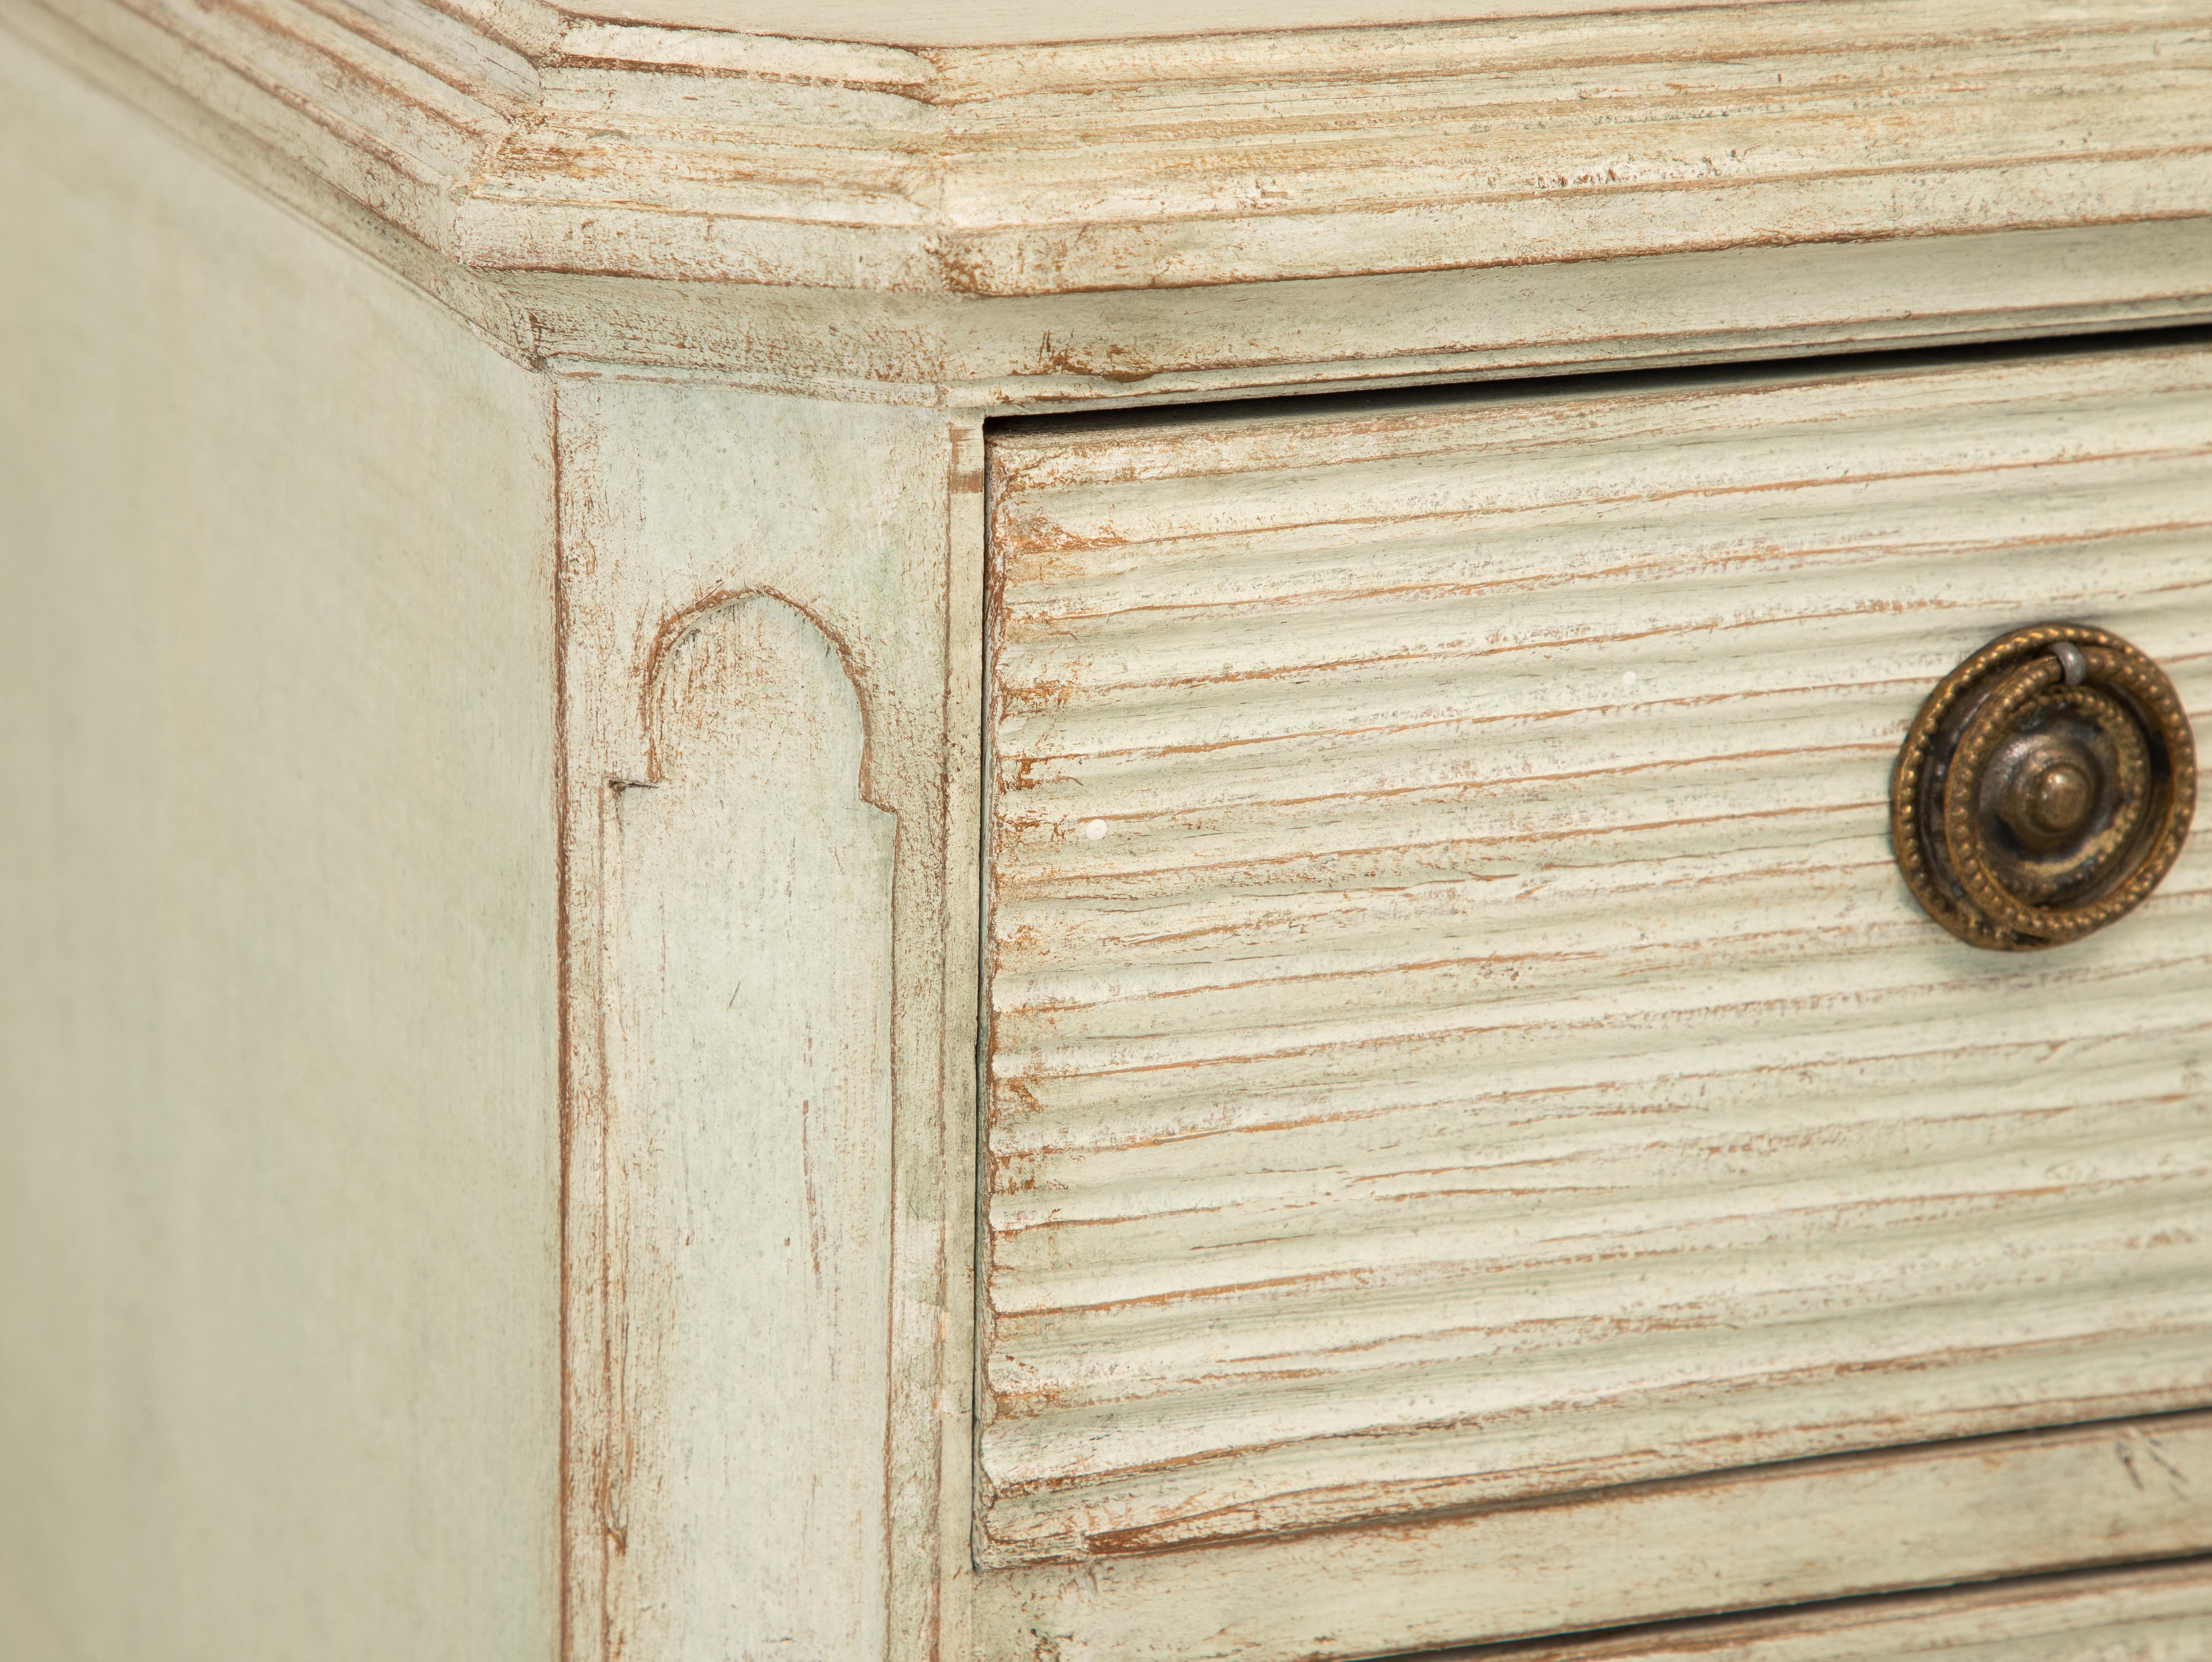 Pair of Gustavian Style Chests of Drawers 2